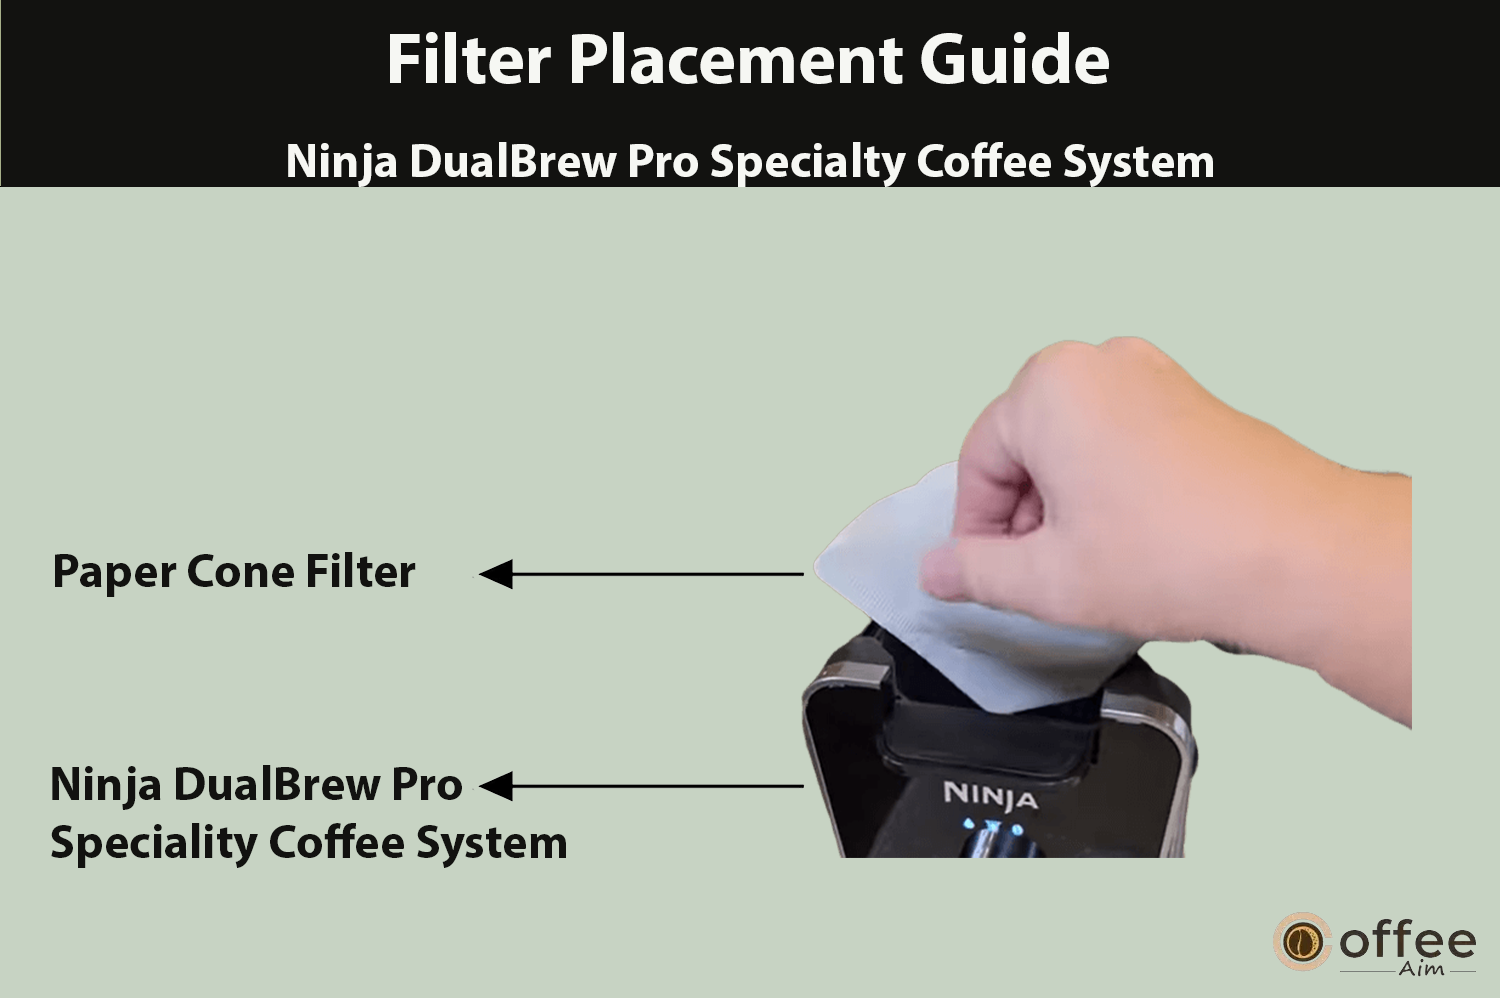 "This image illustrates the insertion of the Paper Cone into the Ninja DualBrew Pro Specialty Coffee System, as presented in the article 'How to Use Ninja DualBrew Pro Specialty Coffee System, Compatible with K-Cup Pods, and 12-Cup Drip Coffee Maker'."